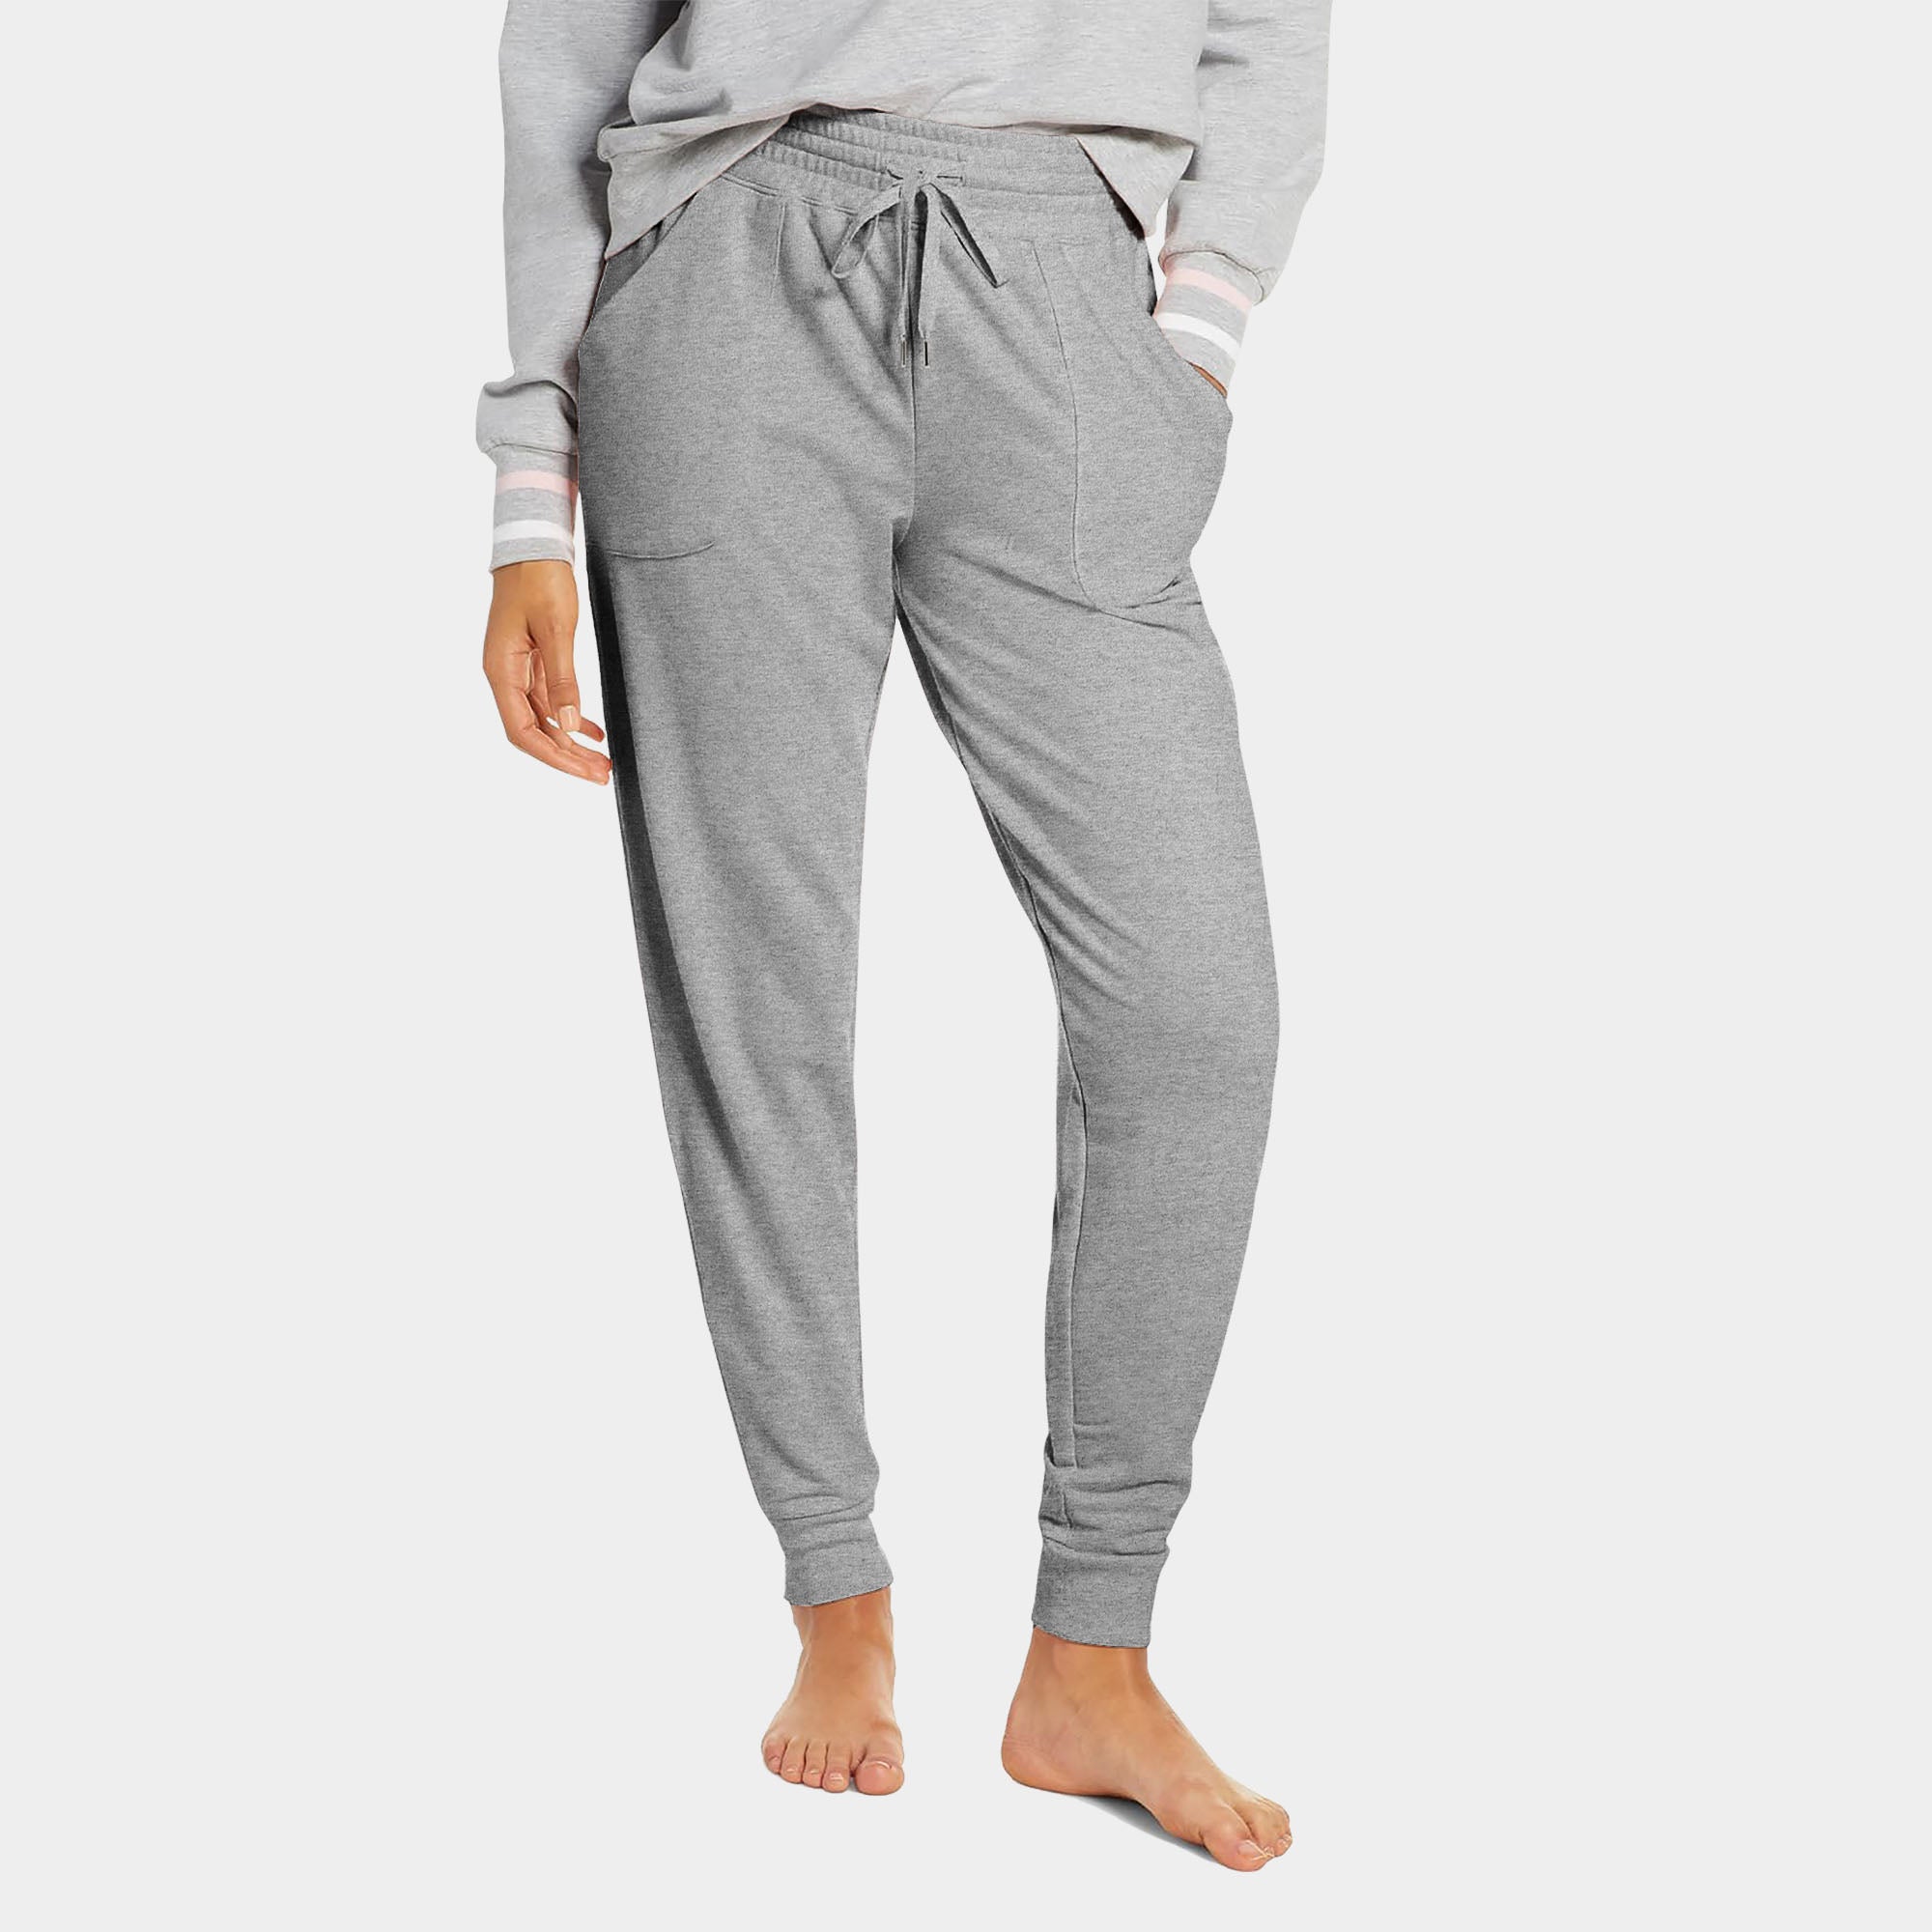 womens fleece sweatpants_yoga joggers_plush inner lining comfort_ribbed cuffs_lady_ladies_sweat for women_activewear_fleece_workout_exercise_weight_pilates_outdoor_indoor_at home_training_running_jogging_hiking_colorfulkoala joggers_yesler_amormio sweatpants_champion_beyond_yoga joggers_nike_rally white_nude sweatpants_lipservice pants_lounge around tan_hanes_teal_fancy_capri_love_french terry_light christmas cotton_Medium Gray